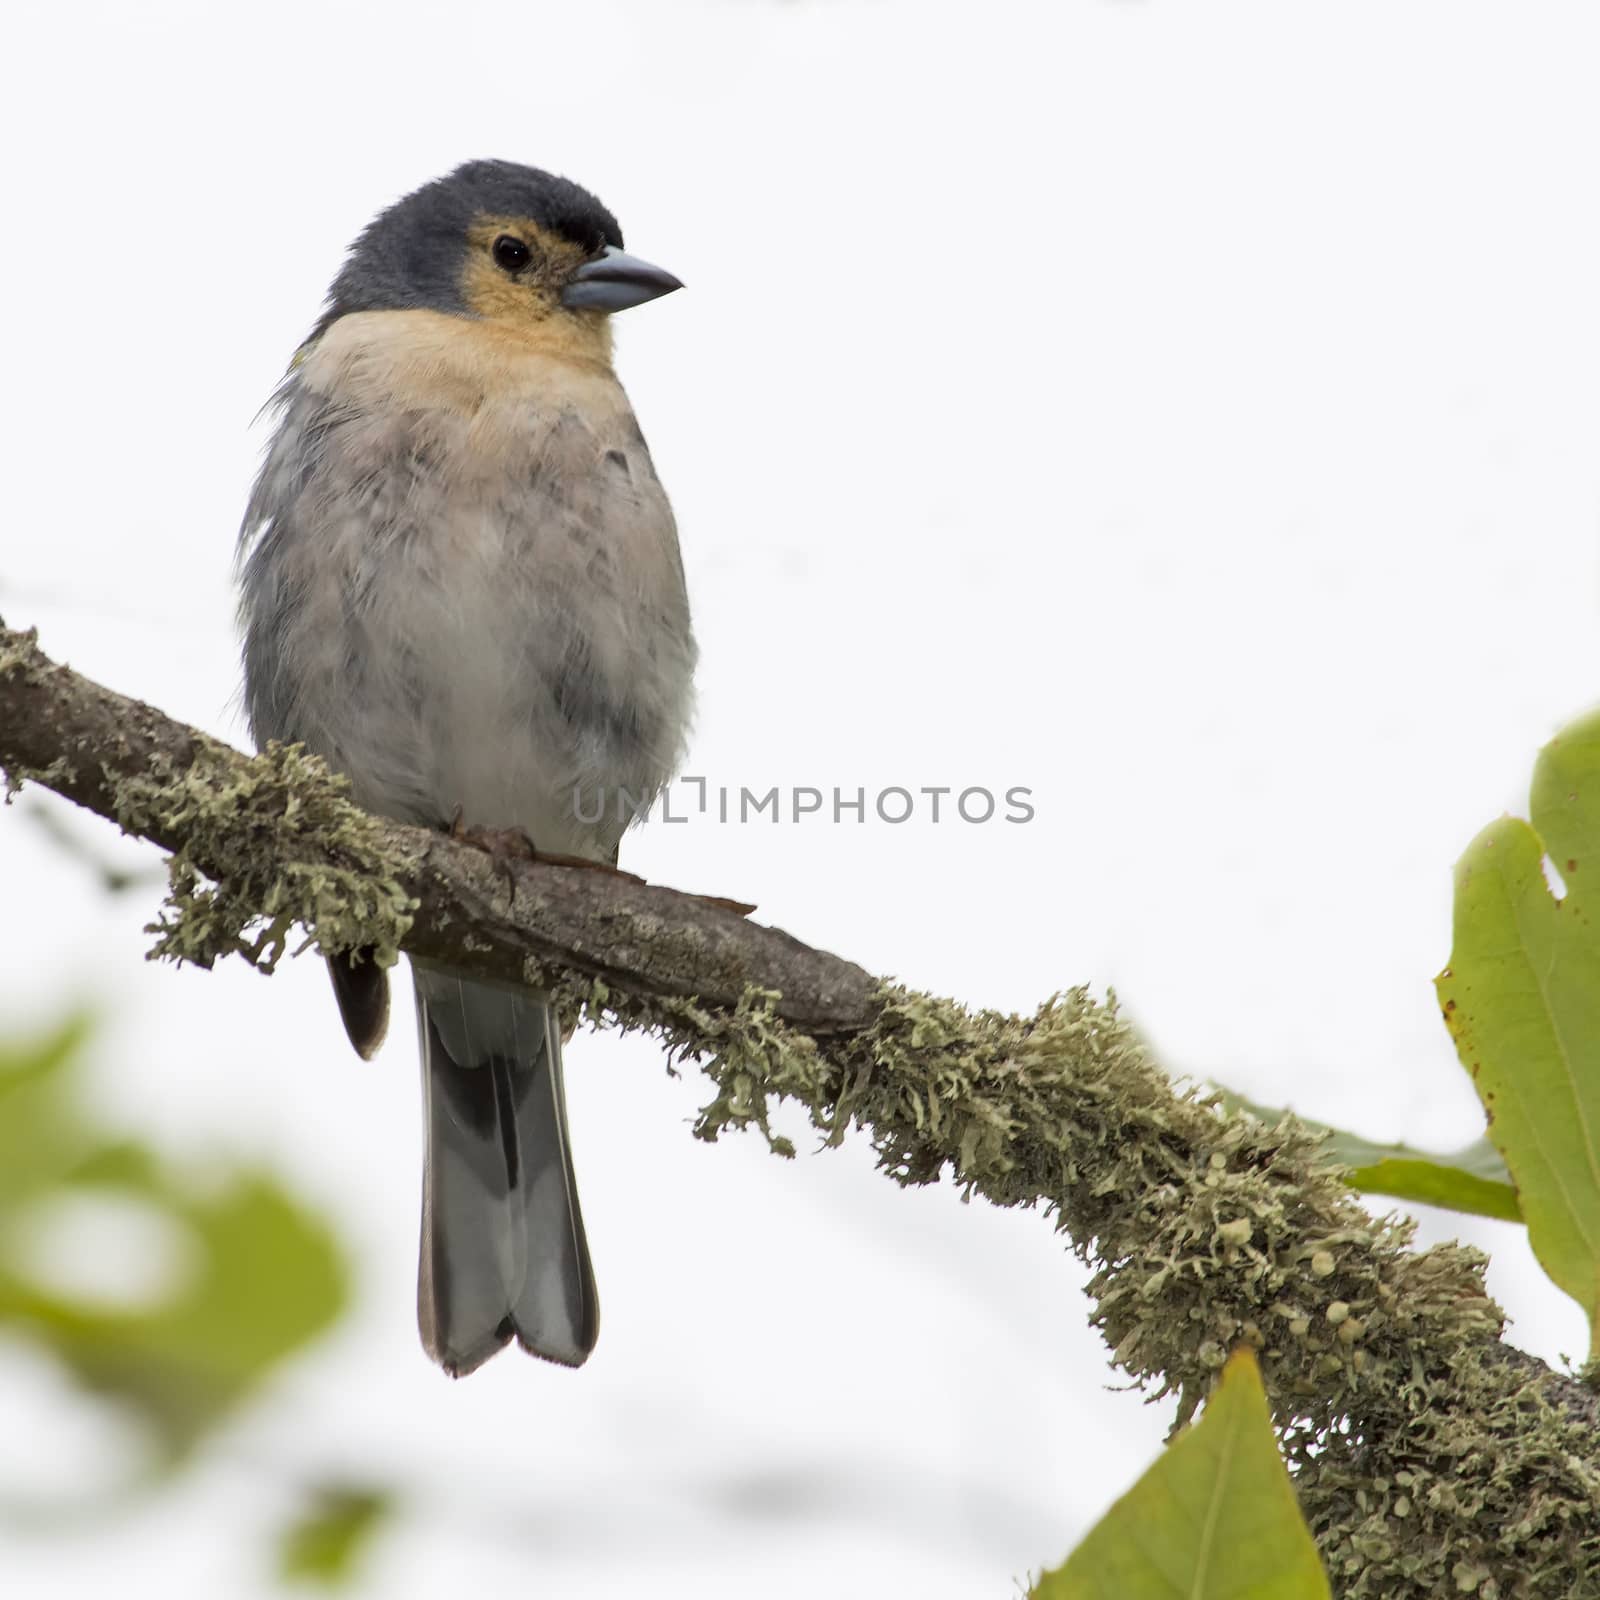 Male finch perched on a branch with green leaves, on the island of Madeira, Portugal